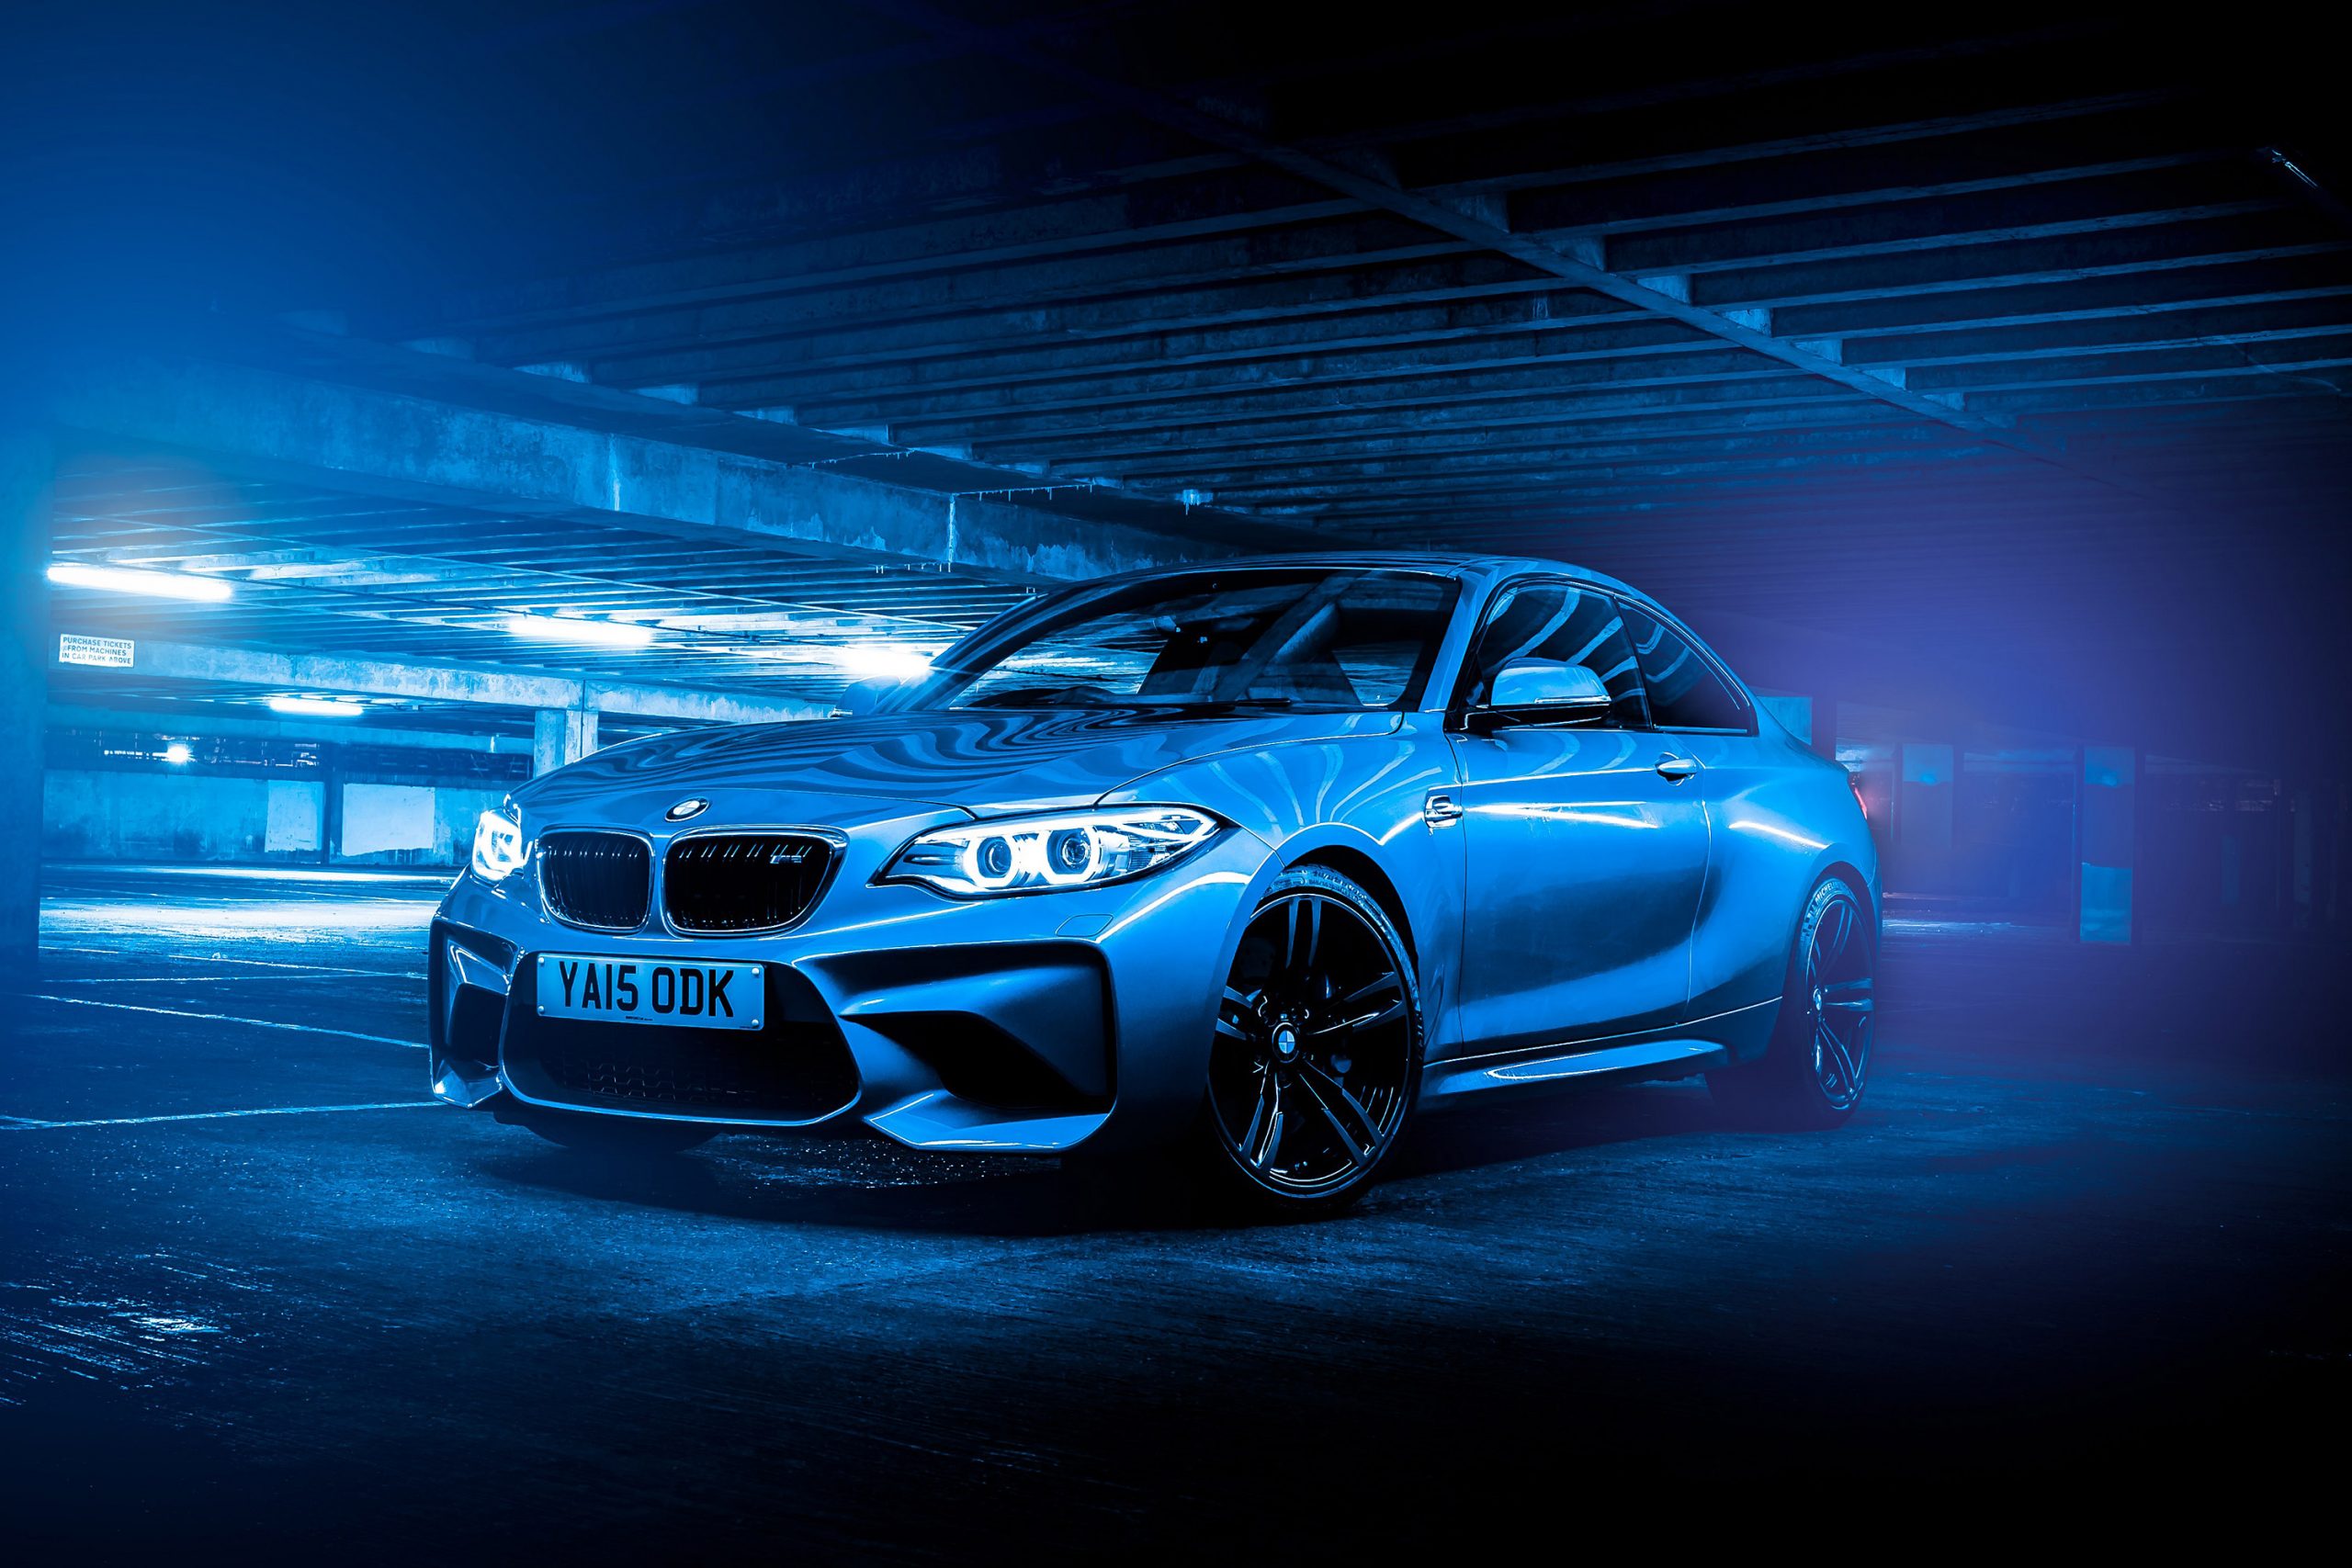 Free Download 2016 Bmw M2 Coupe Wallpapers Supercarsnet 2560x1707 For Your Desktop Mobile Tablet Explore 20 Bmw Backgrounds Bmw Wallpaper Bmw Wallpapers Bmw E36 Wallpaper